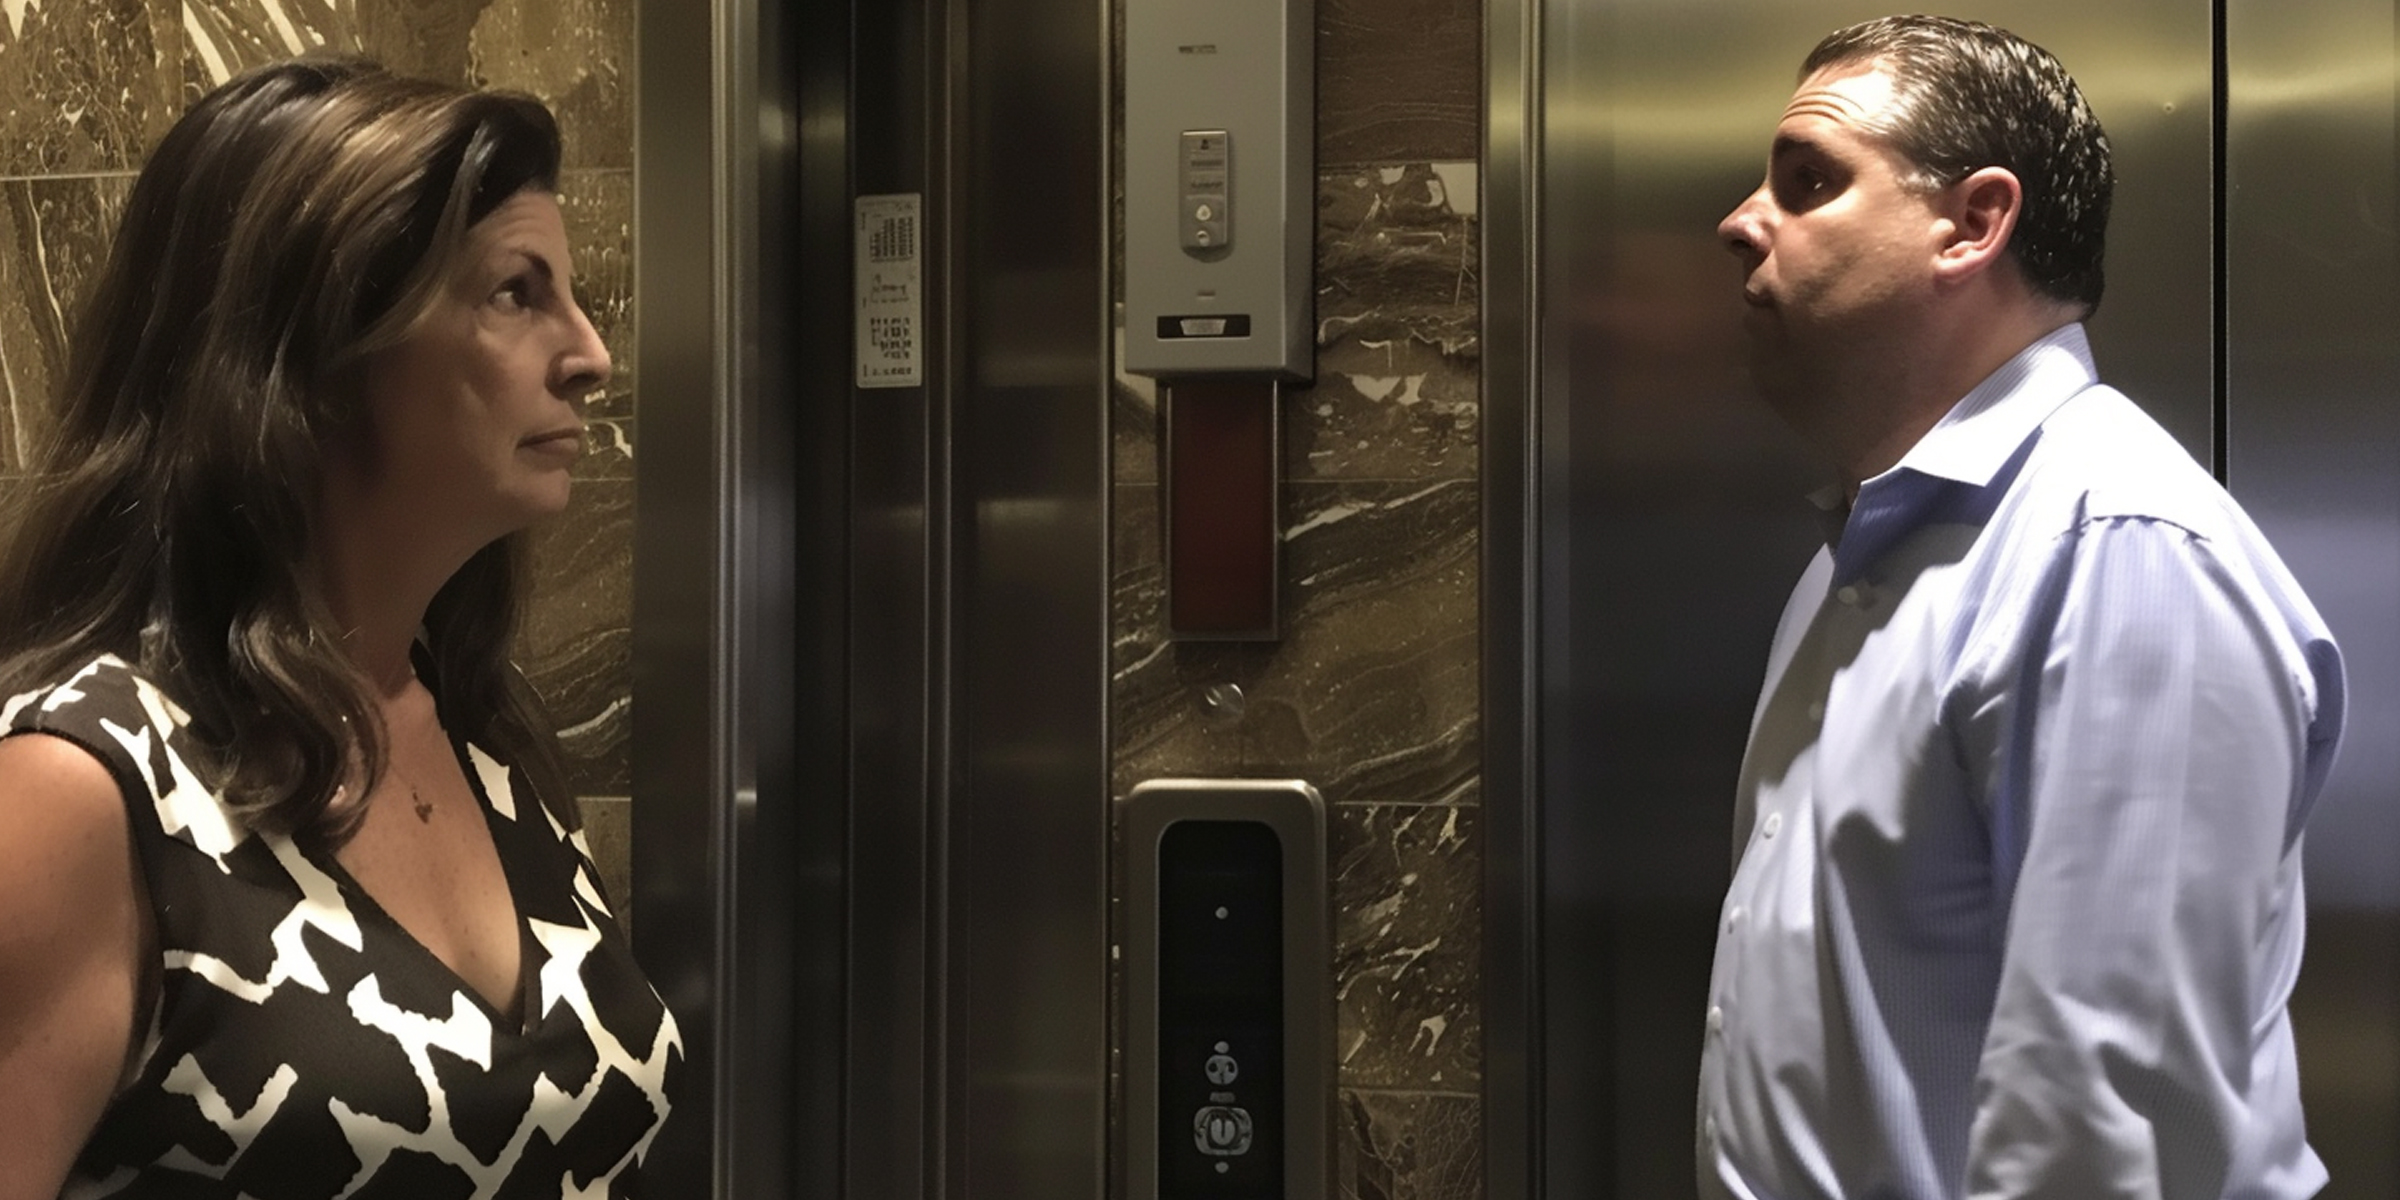 A man and a woman in an elevator | Source: Midjourney